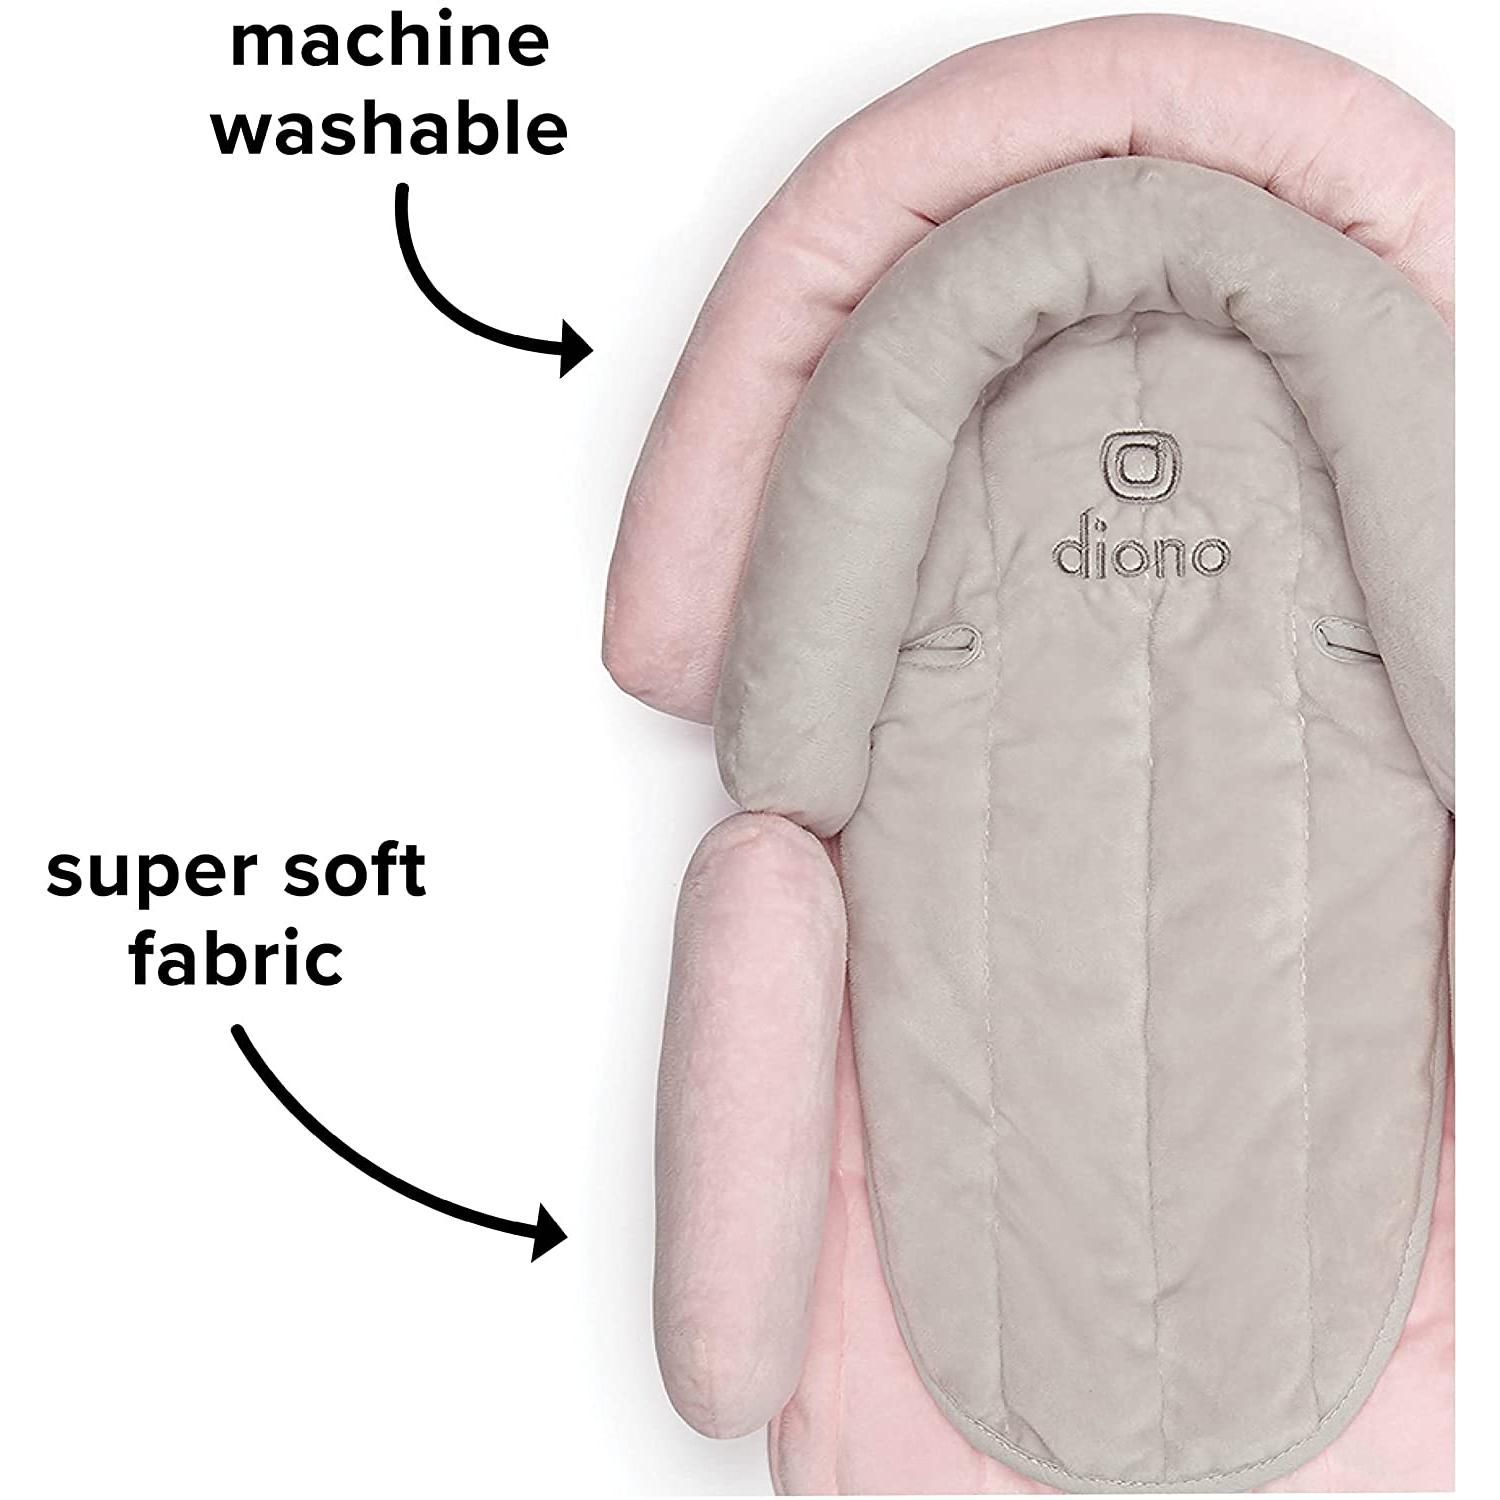 Diono 2-in-1 Head Support - Cuddle Soft - Pink